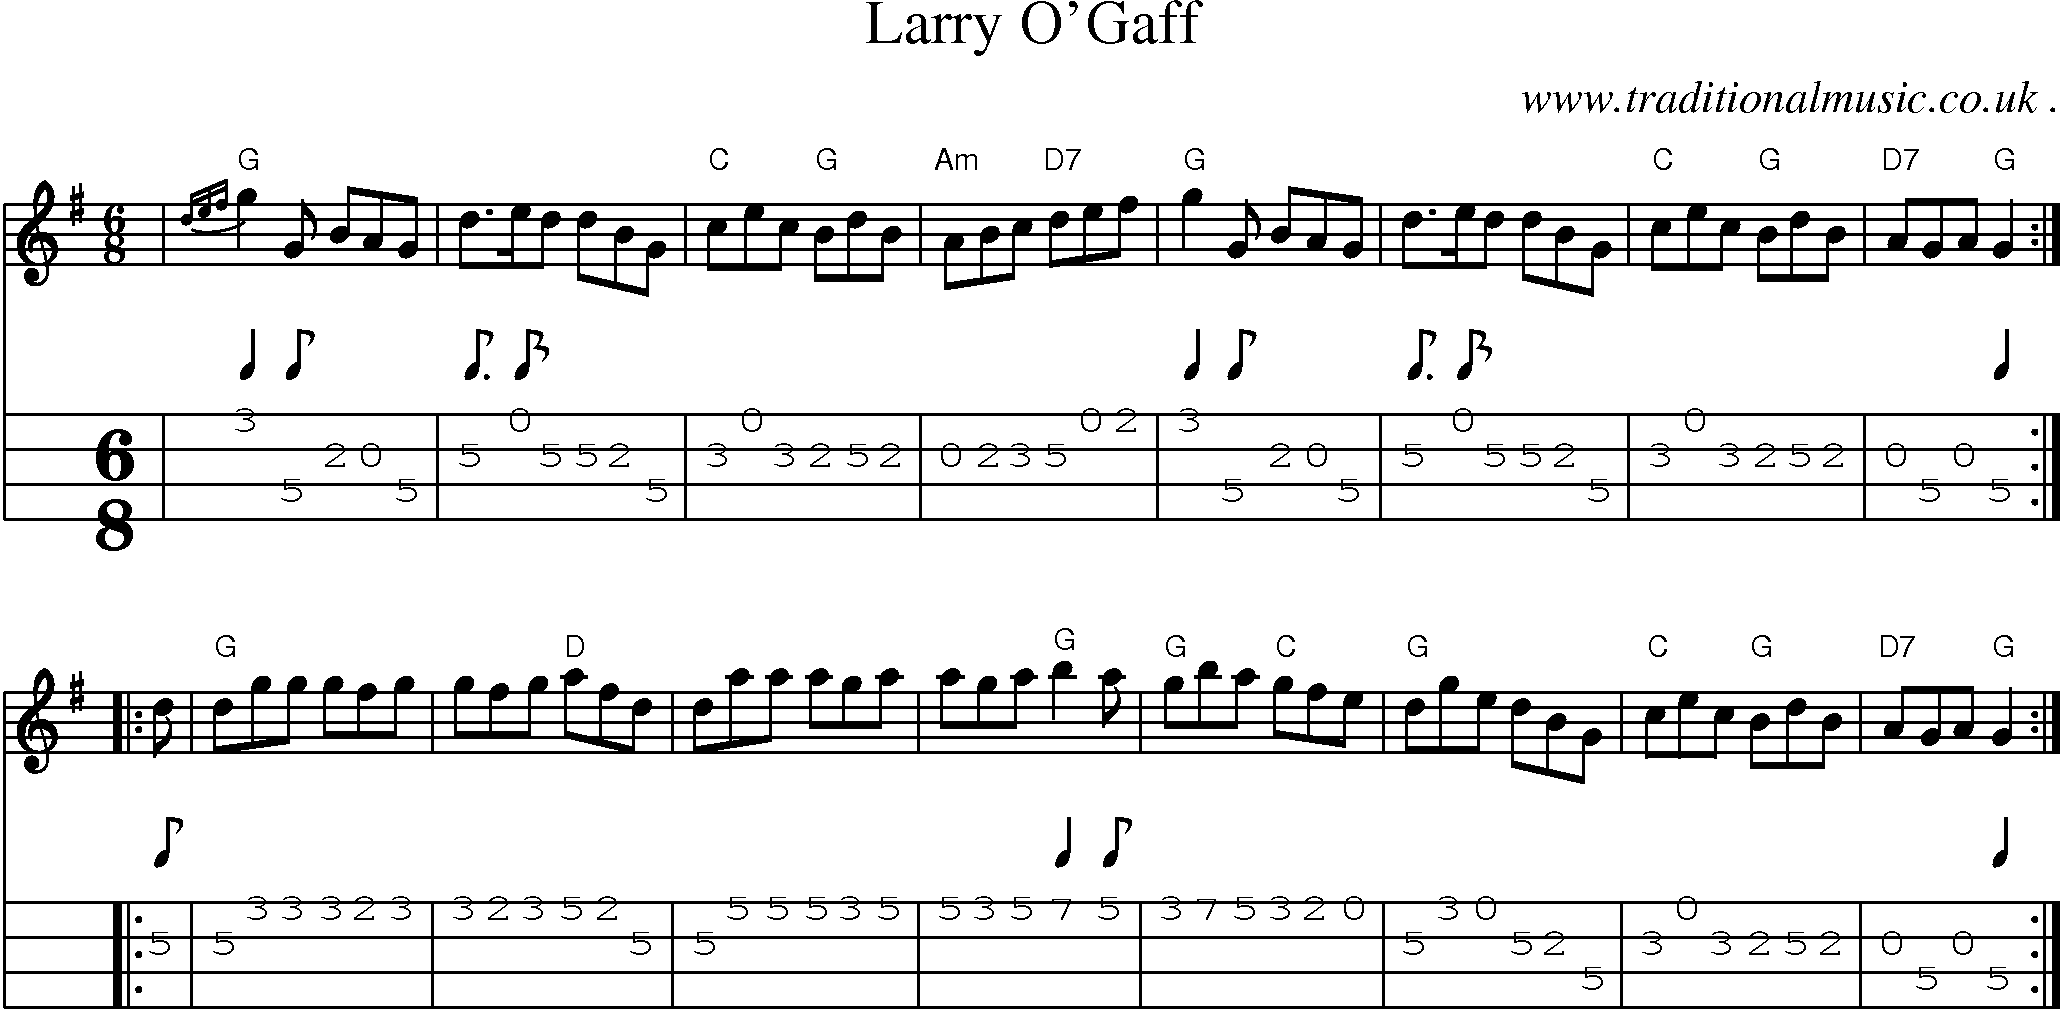 Sheet-music  score, Chords and Mandolin Tabs for Larry Ogaff